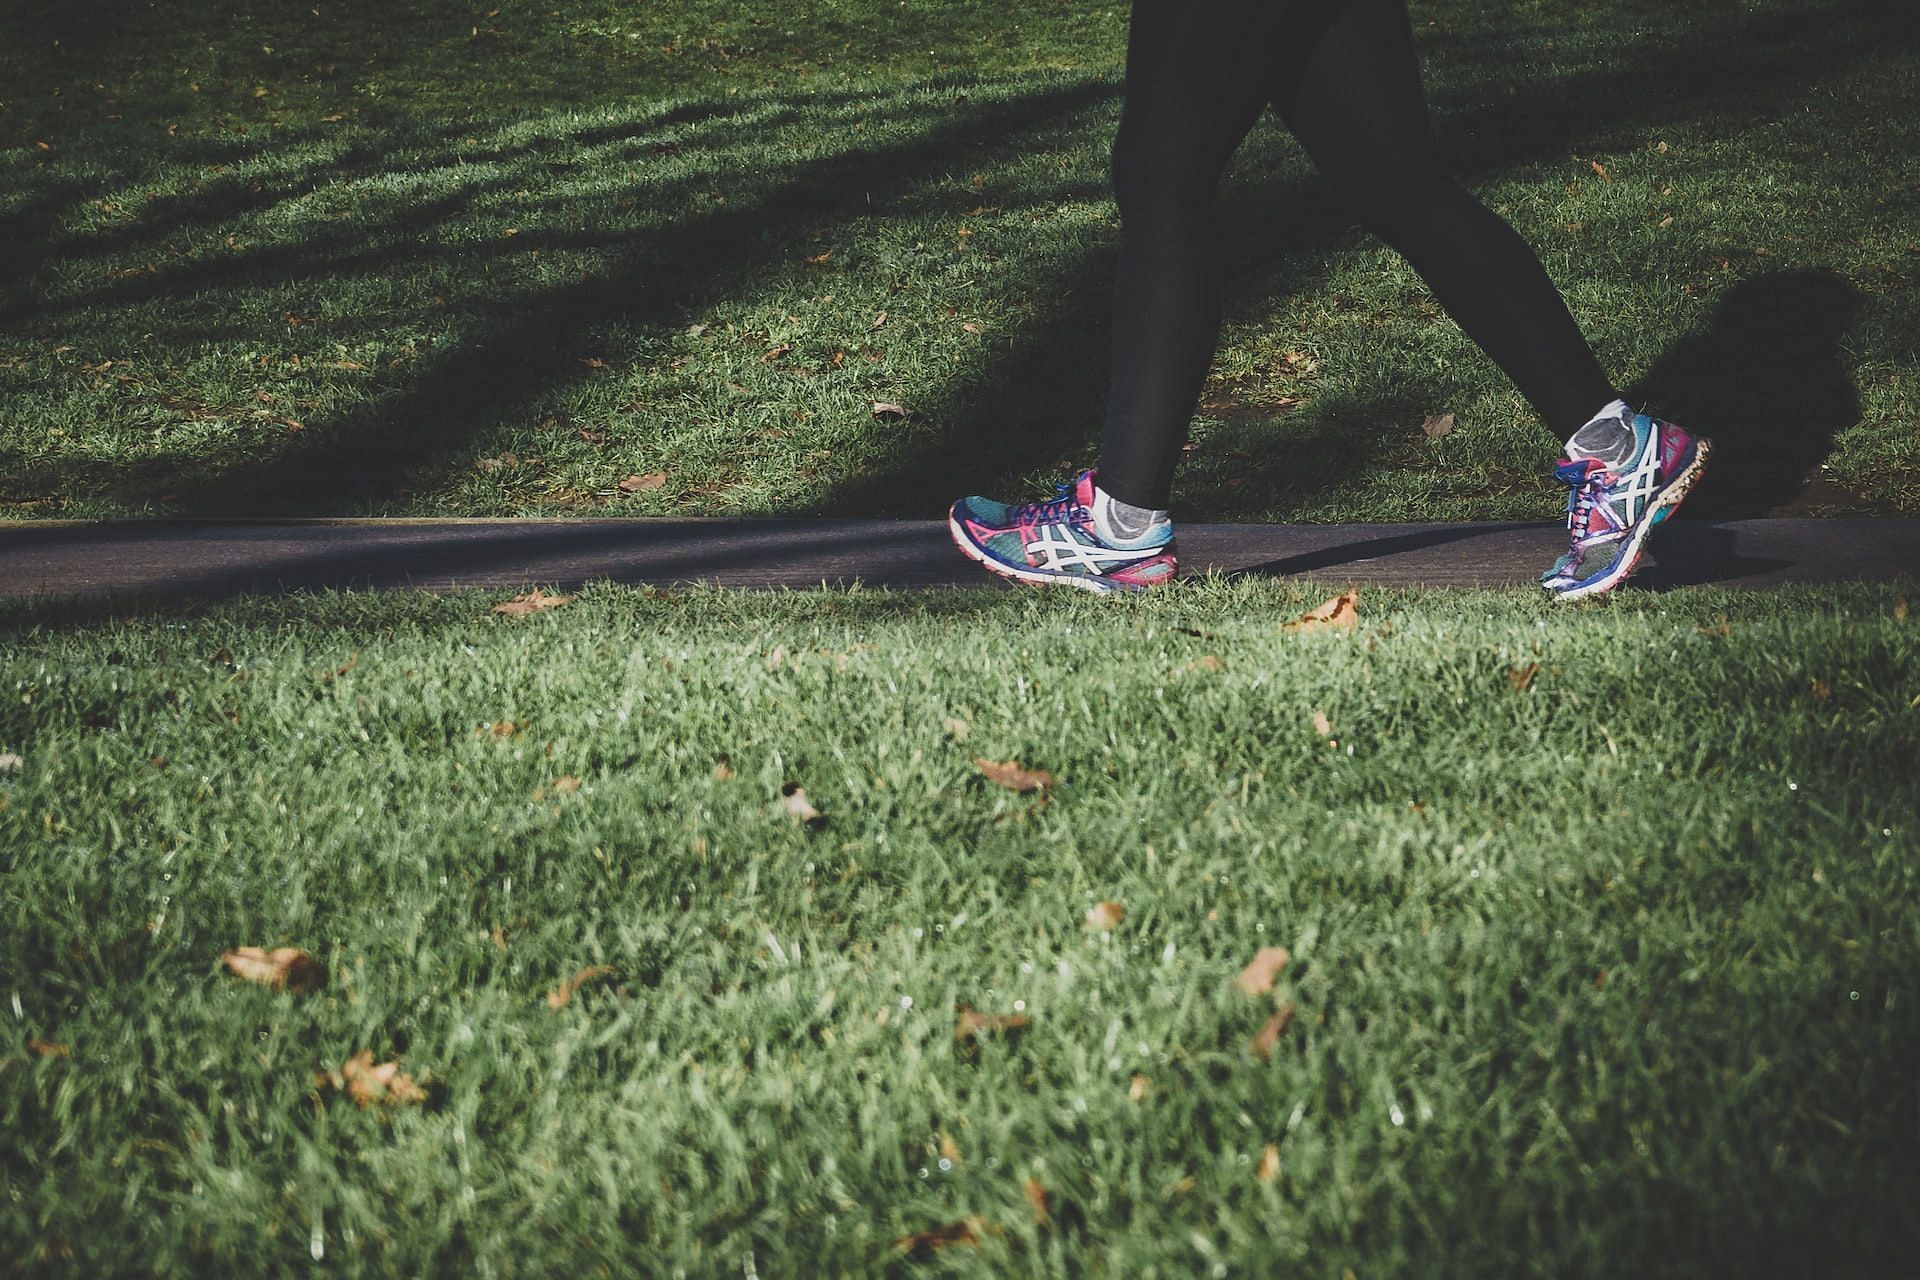 Find out how many calories you burn while walking a mile. (Photo via Arek Adeoye/Unsplash)